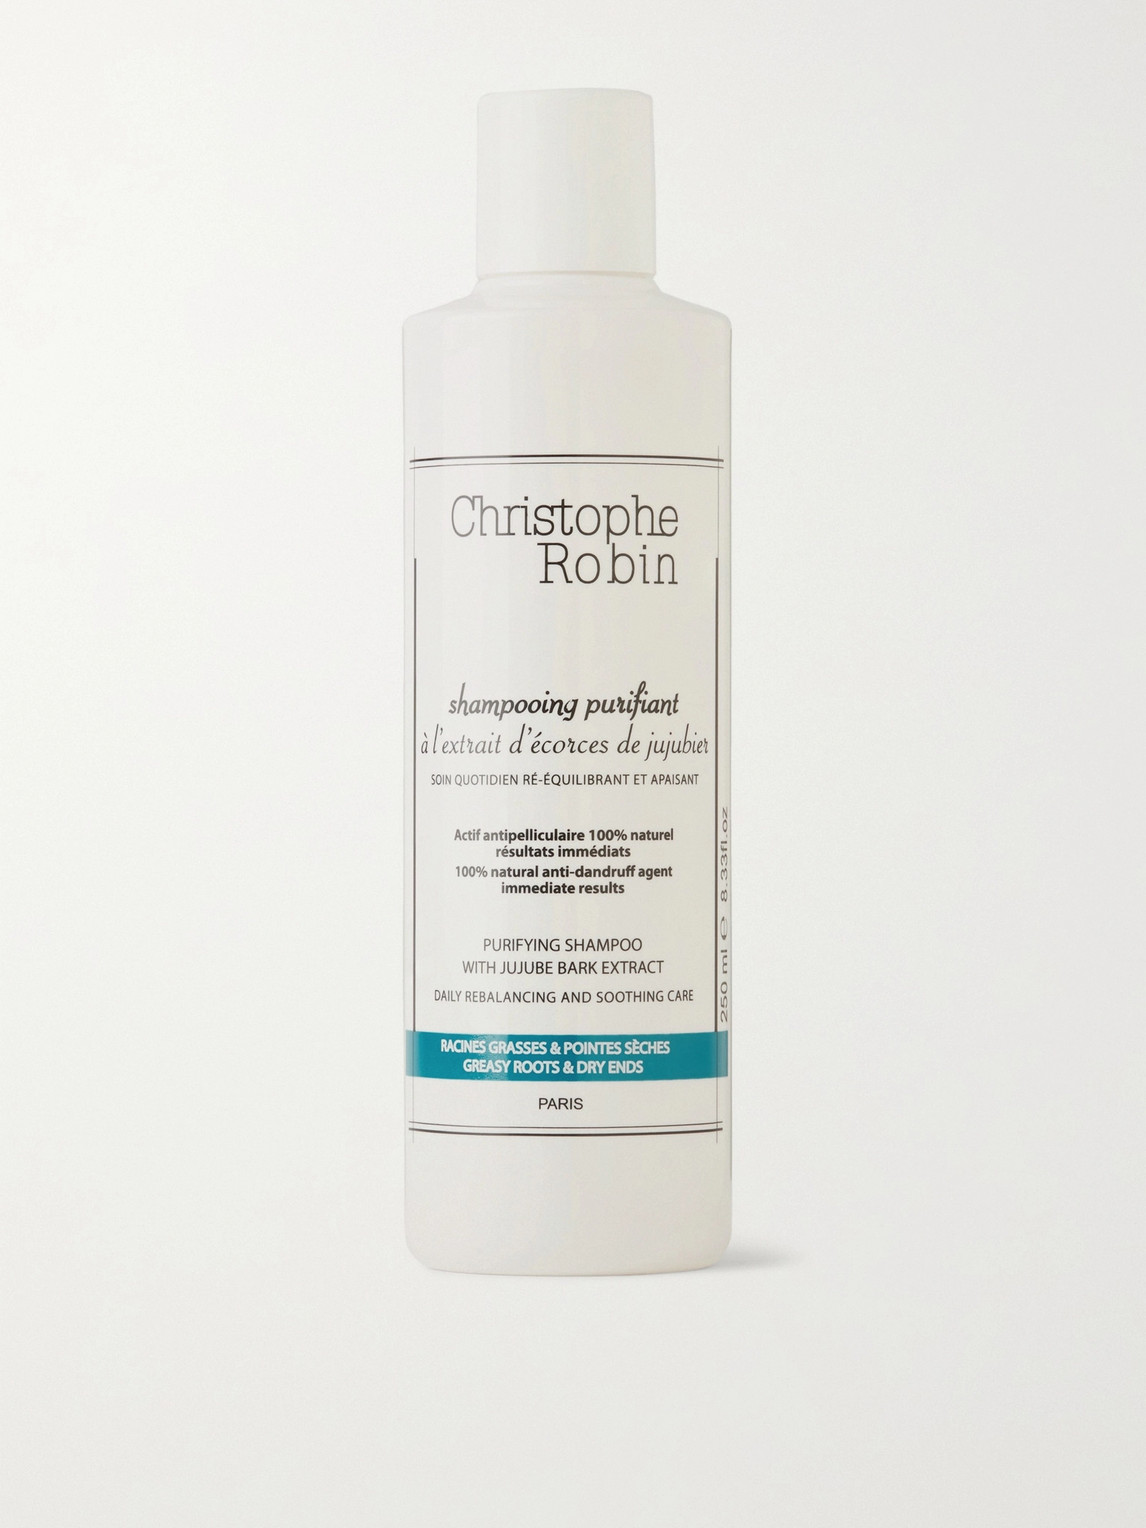 Christophe Robin Purifying Shampoo, 250ml In Colorless